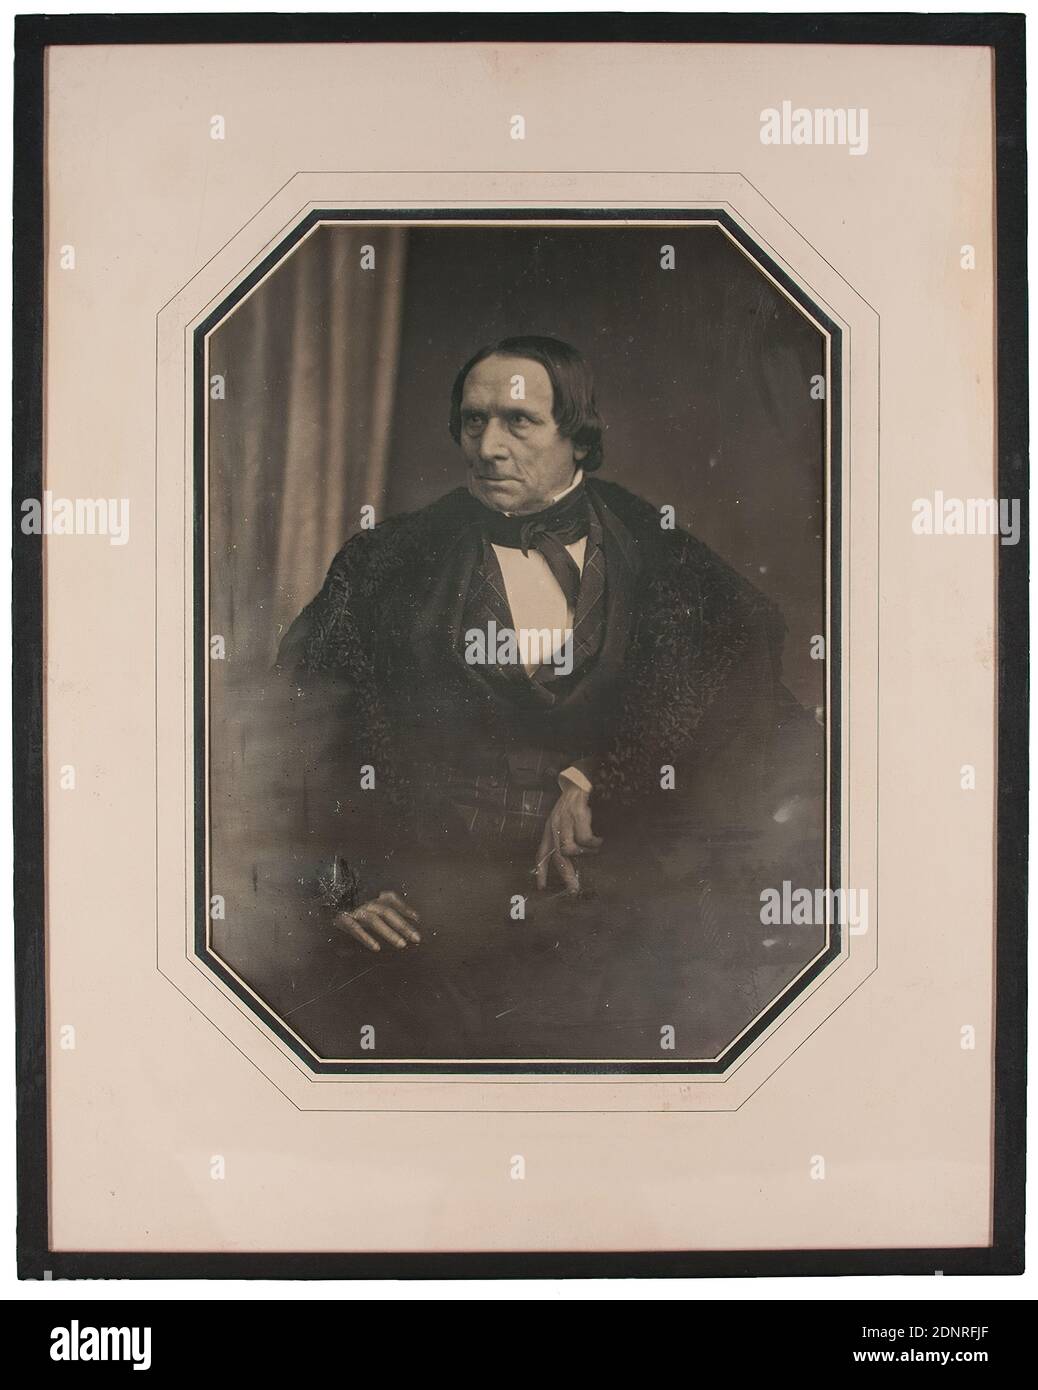 Hermann Biow, Peter von Cornelius, donation Hermann Stachow, daguerreotype, picture size : height: 19.8 cm; width: 14.6 cm, inscribed: verso o. l.: in blue ink on label: Peter von Cornelius, painter, numbered: verso o. right: in black ink on label: D.S. 80, silver mark: lower right on plate: asterisk, hallmark of fineness: lower left on plate: 30, portrait photography, man, historical person, artist Stock Photo